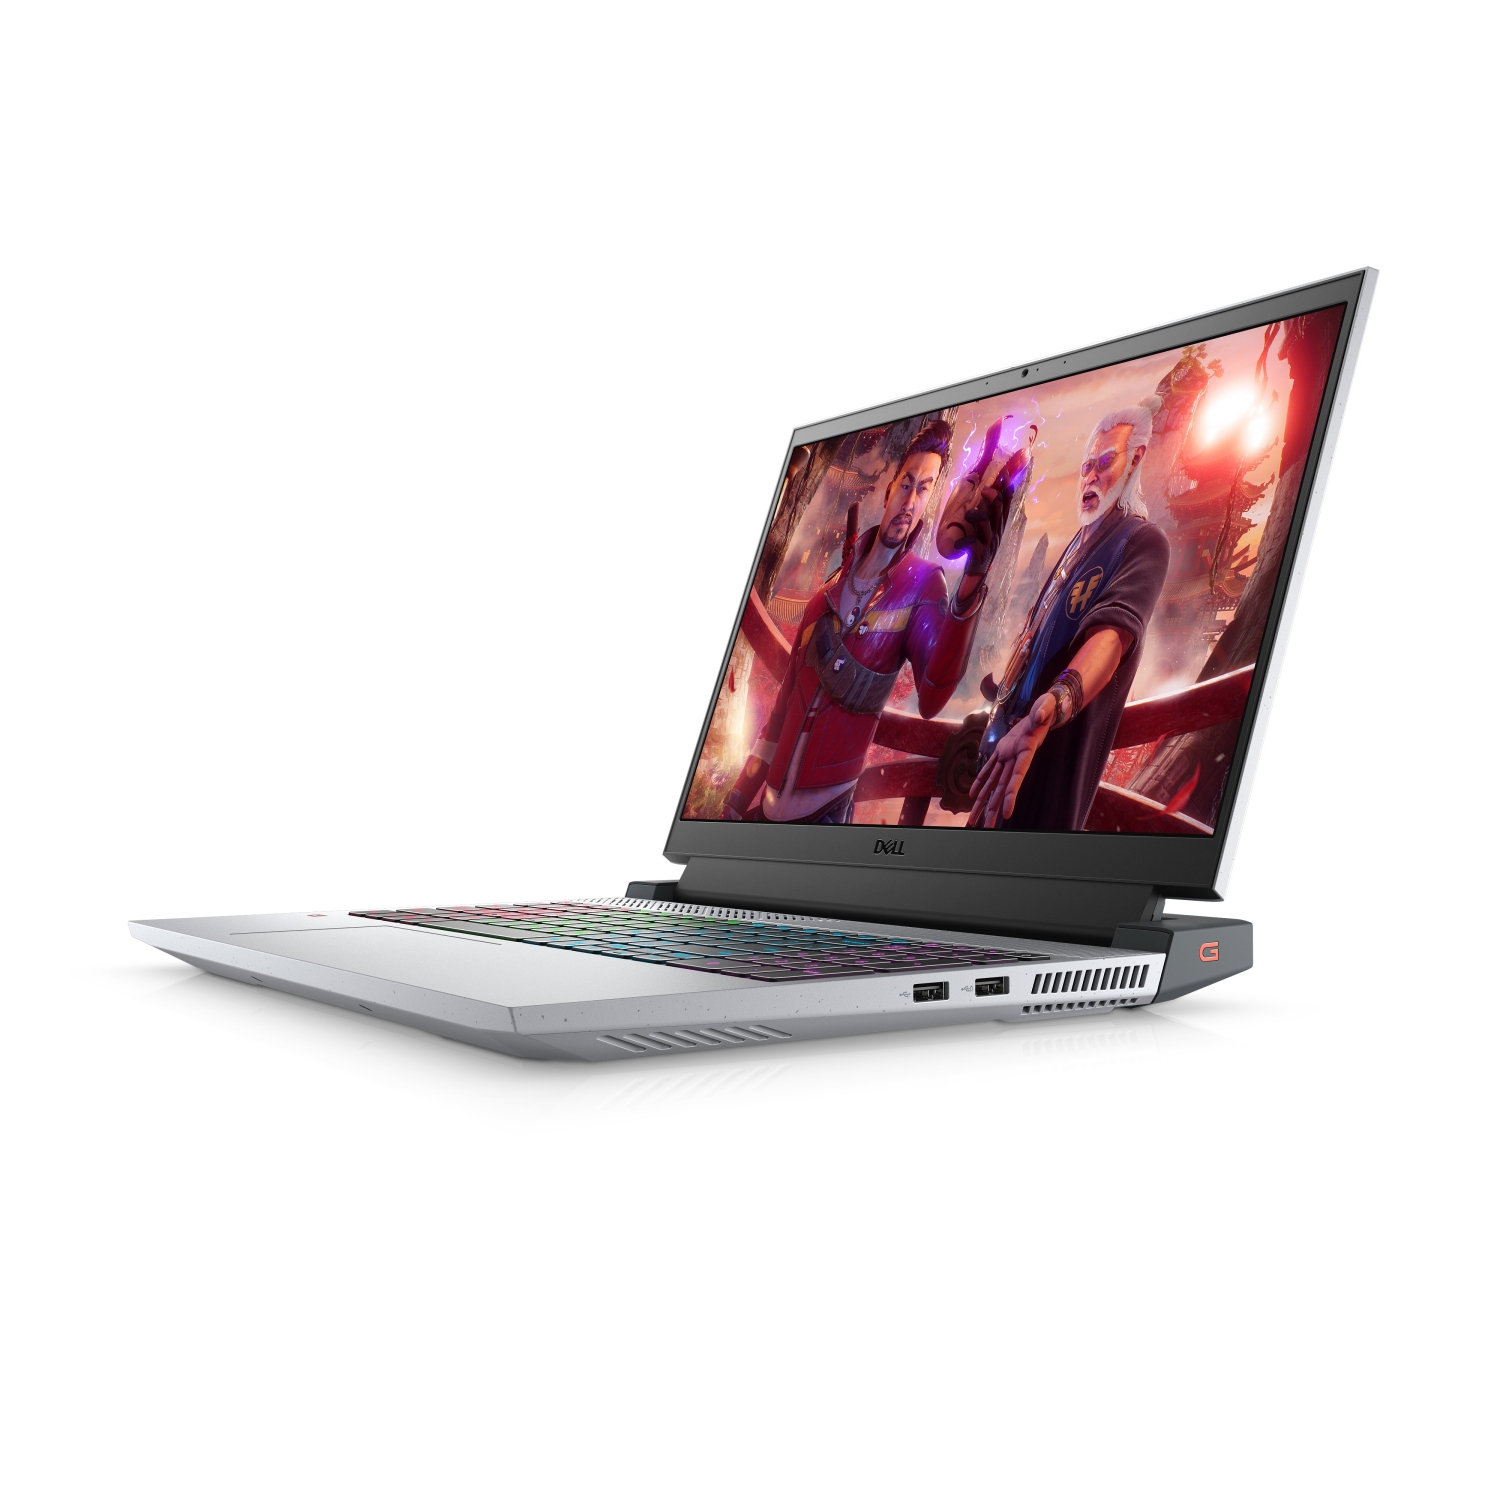 Refurbished (Excellent) - Dell G15 5515 Gaming Laptop (2021) | 15.6" FHD | Core Ryzen 7 - 512GB SSD - 16GB RAM - RTX 3060 | 8 Cores @ 4.6 GHz Certified Refurbished